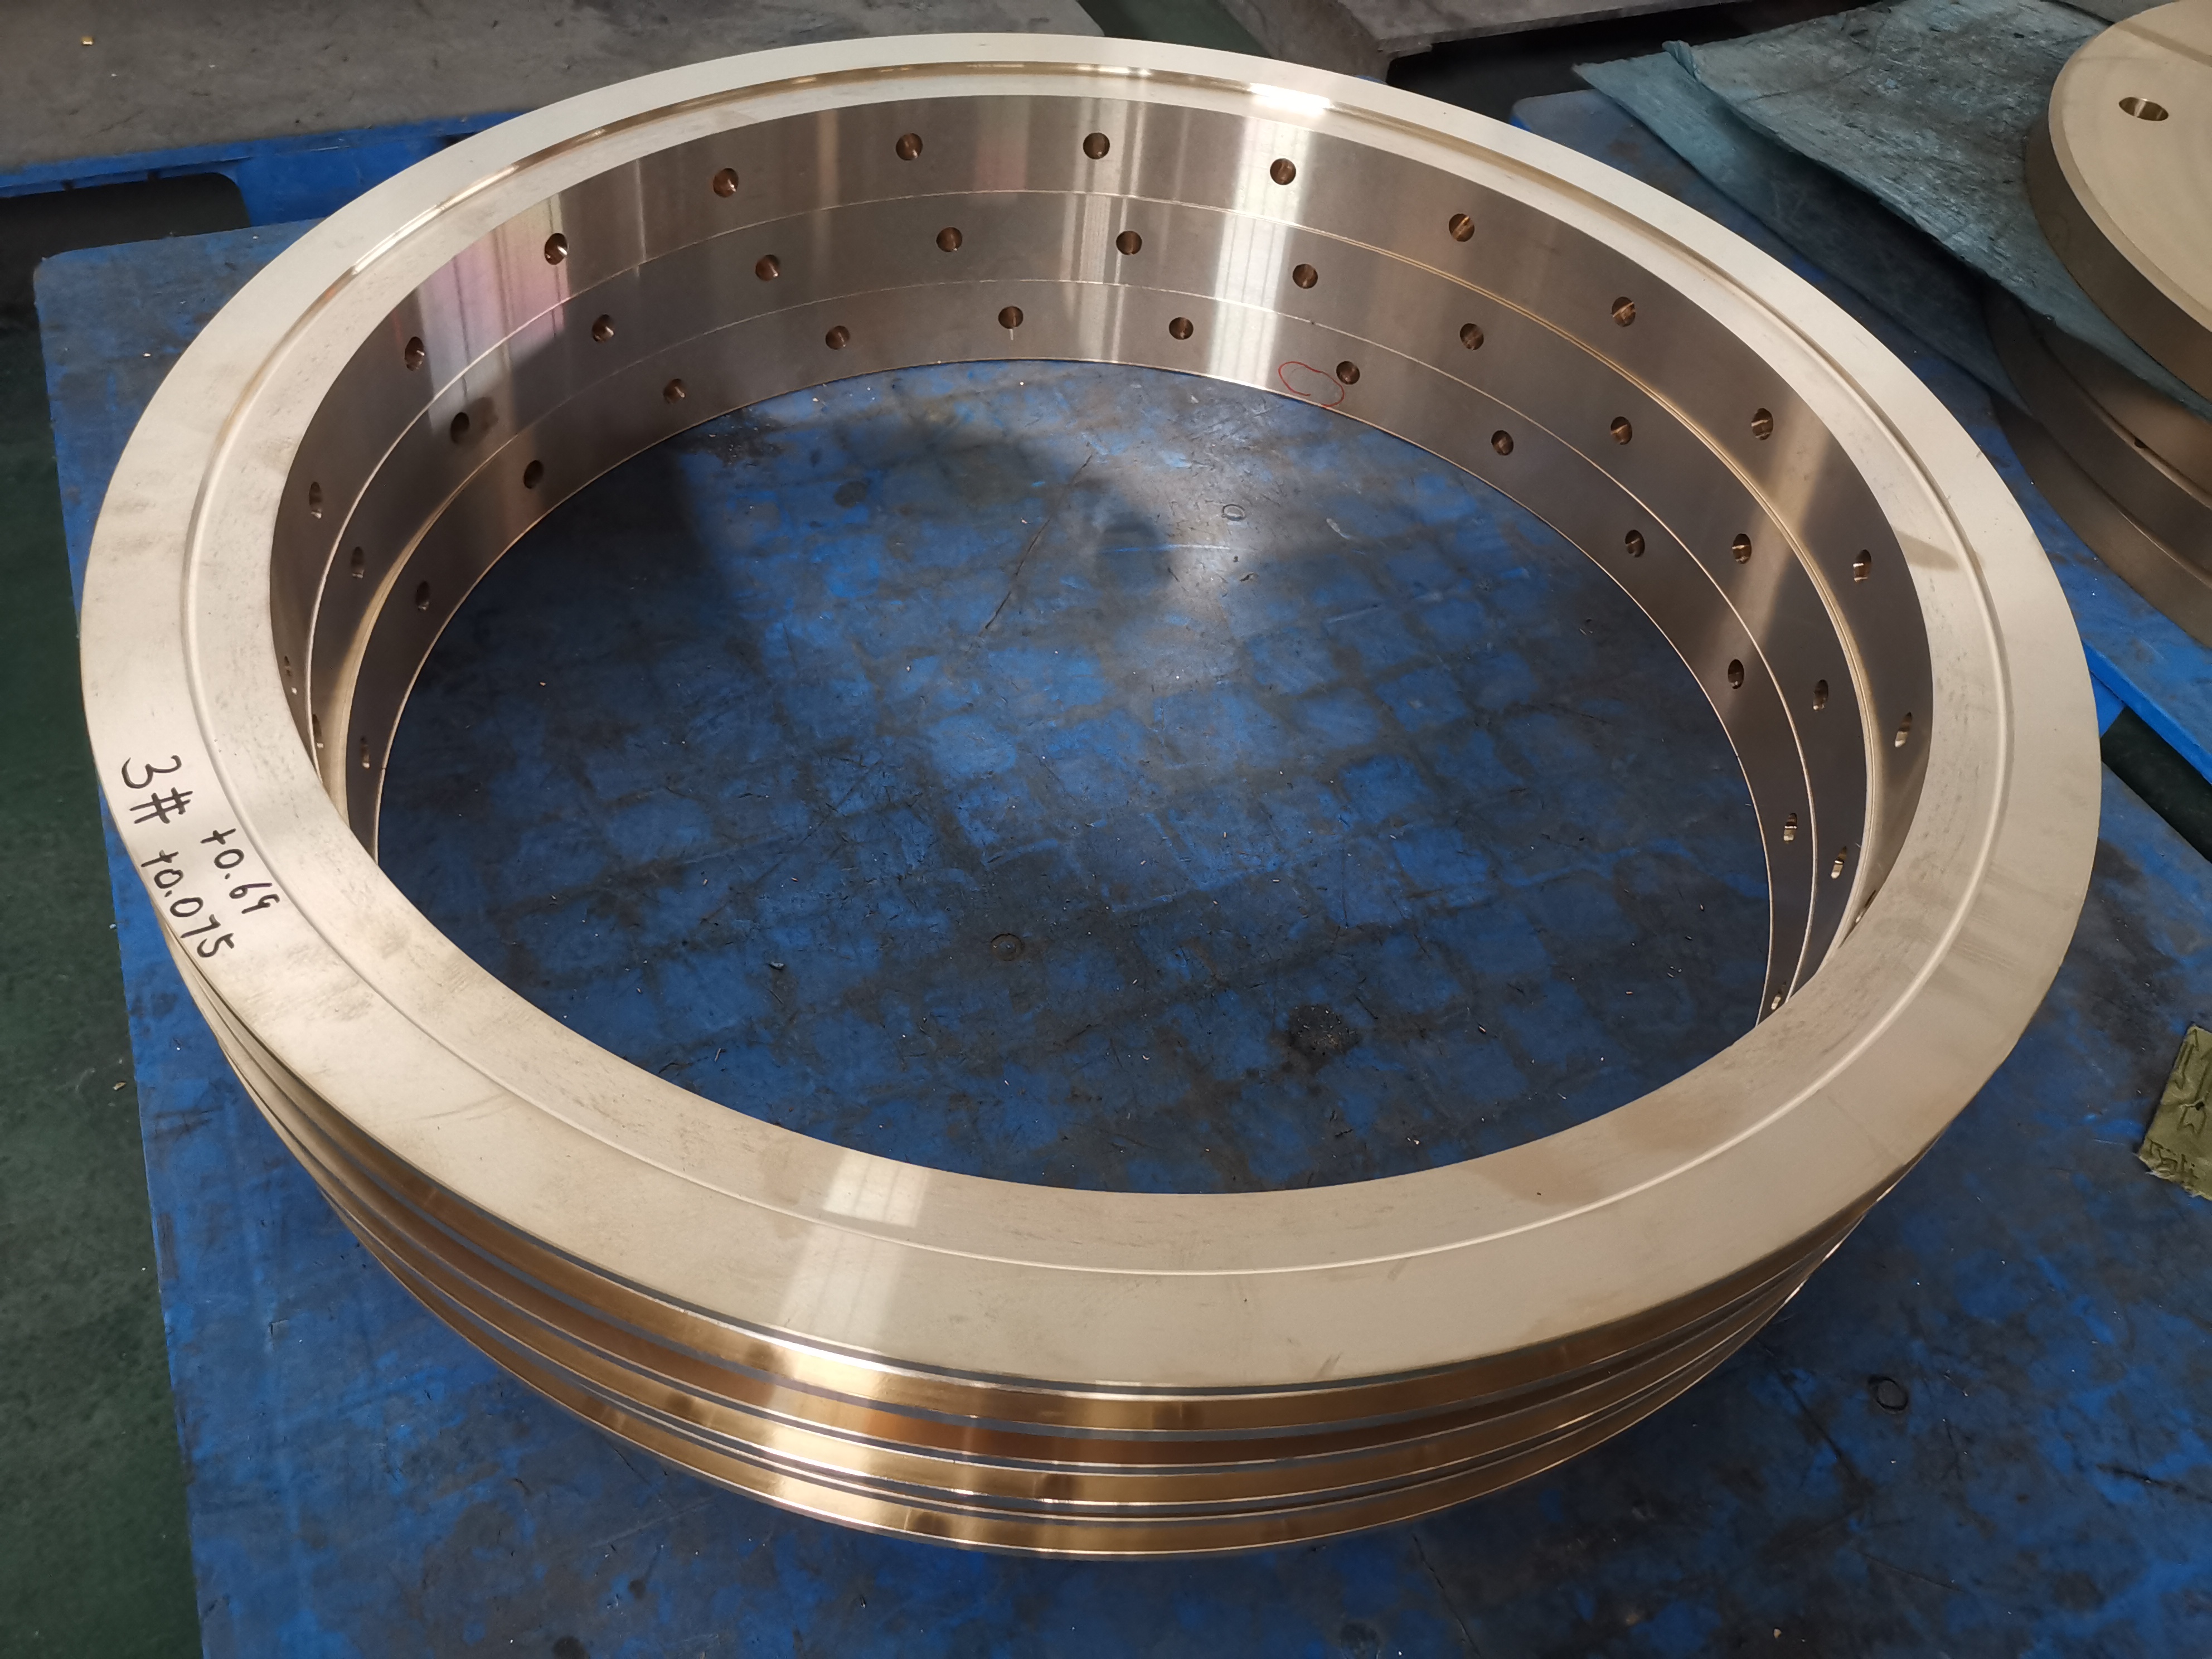  Copper alloy rings ,floating oil distribution rings for Wind power equipment gearbox 